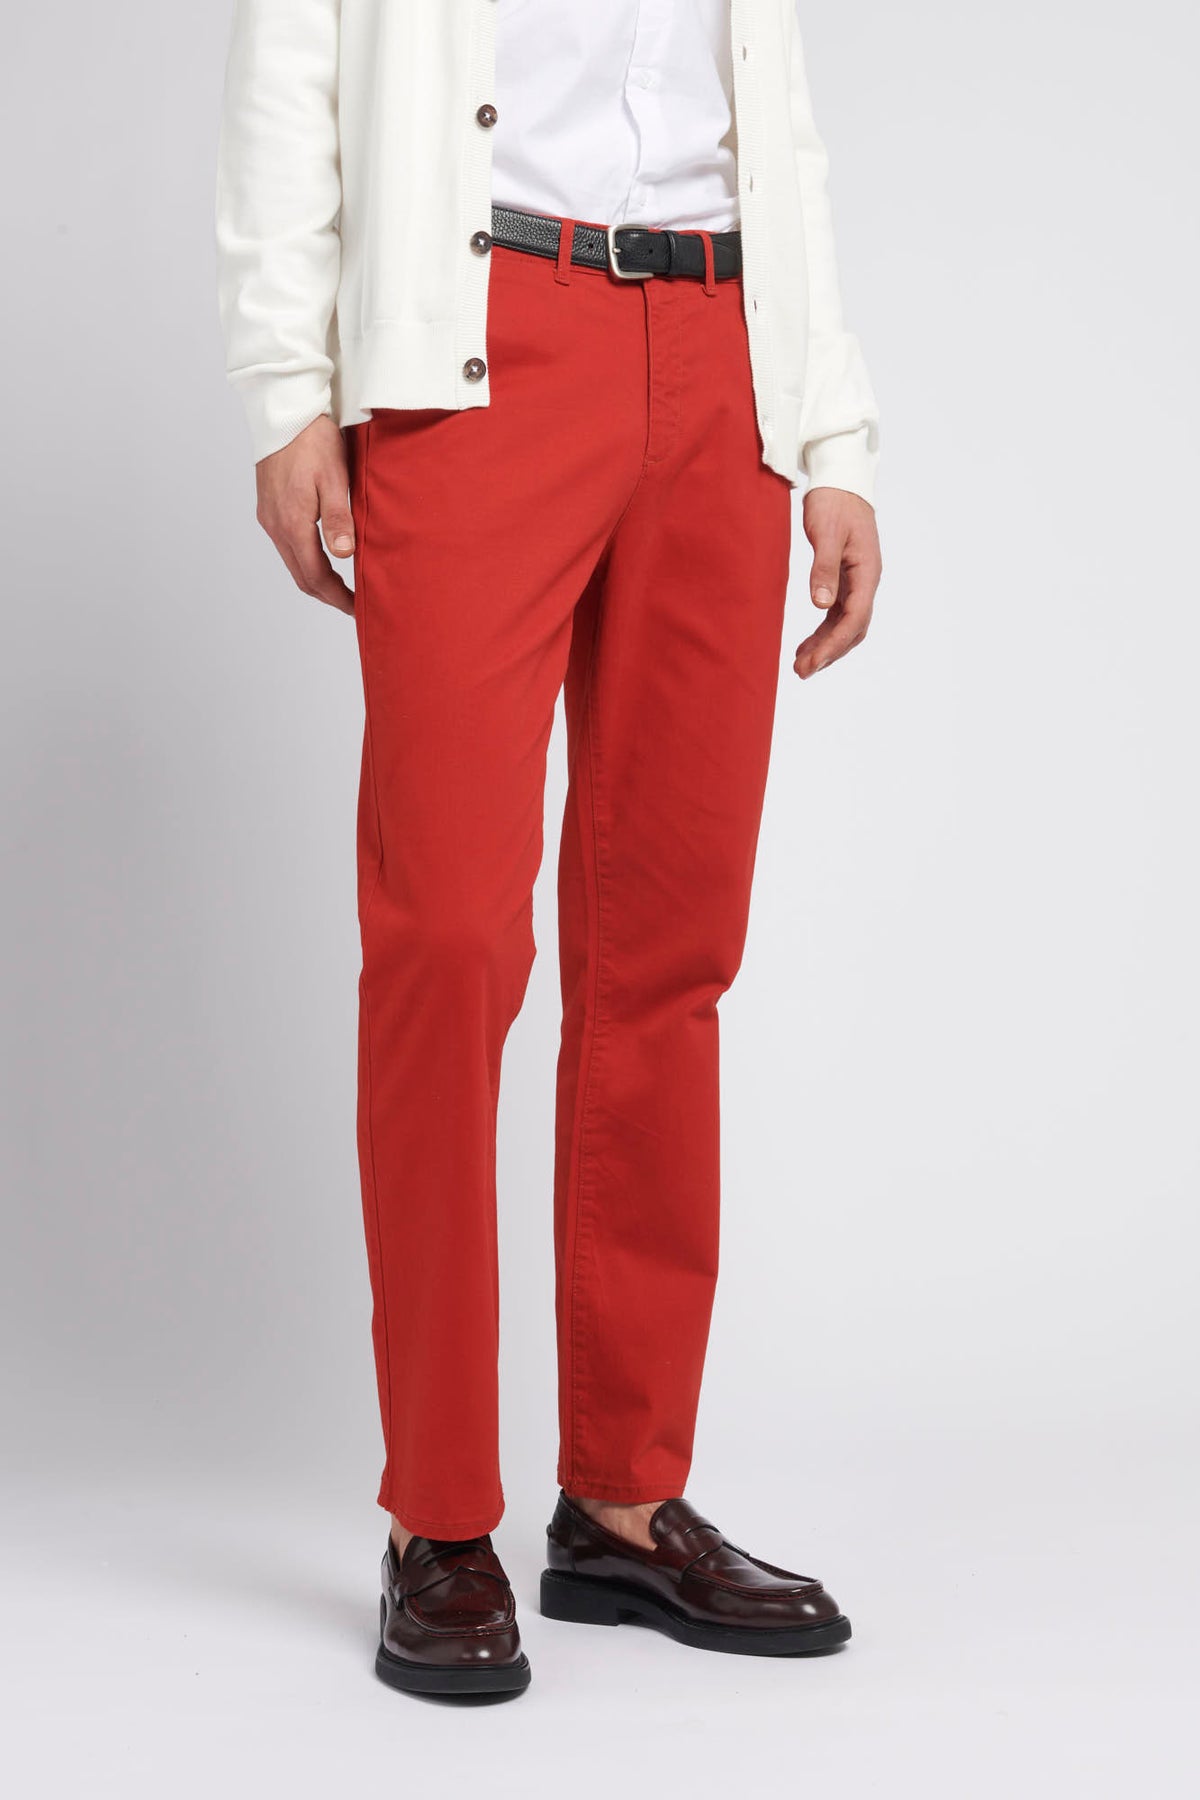 Mens Everyday Chino in Ketchup